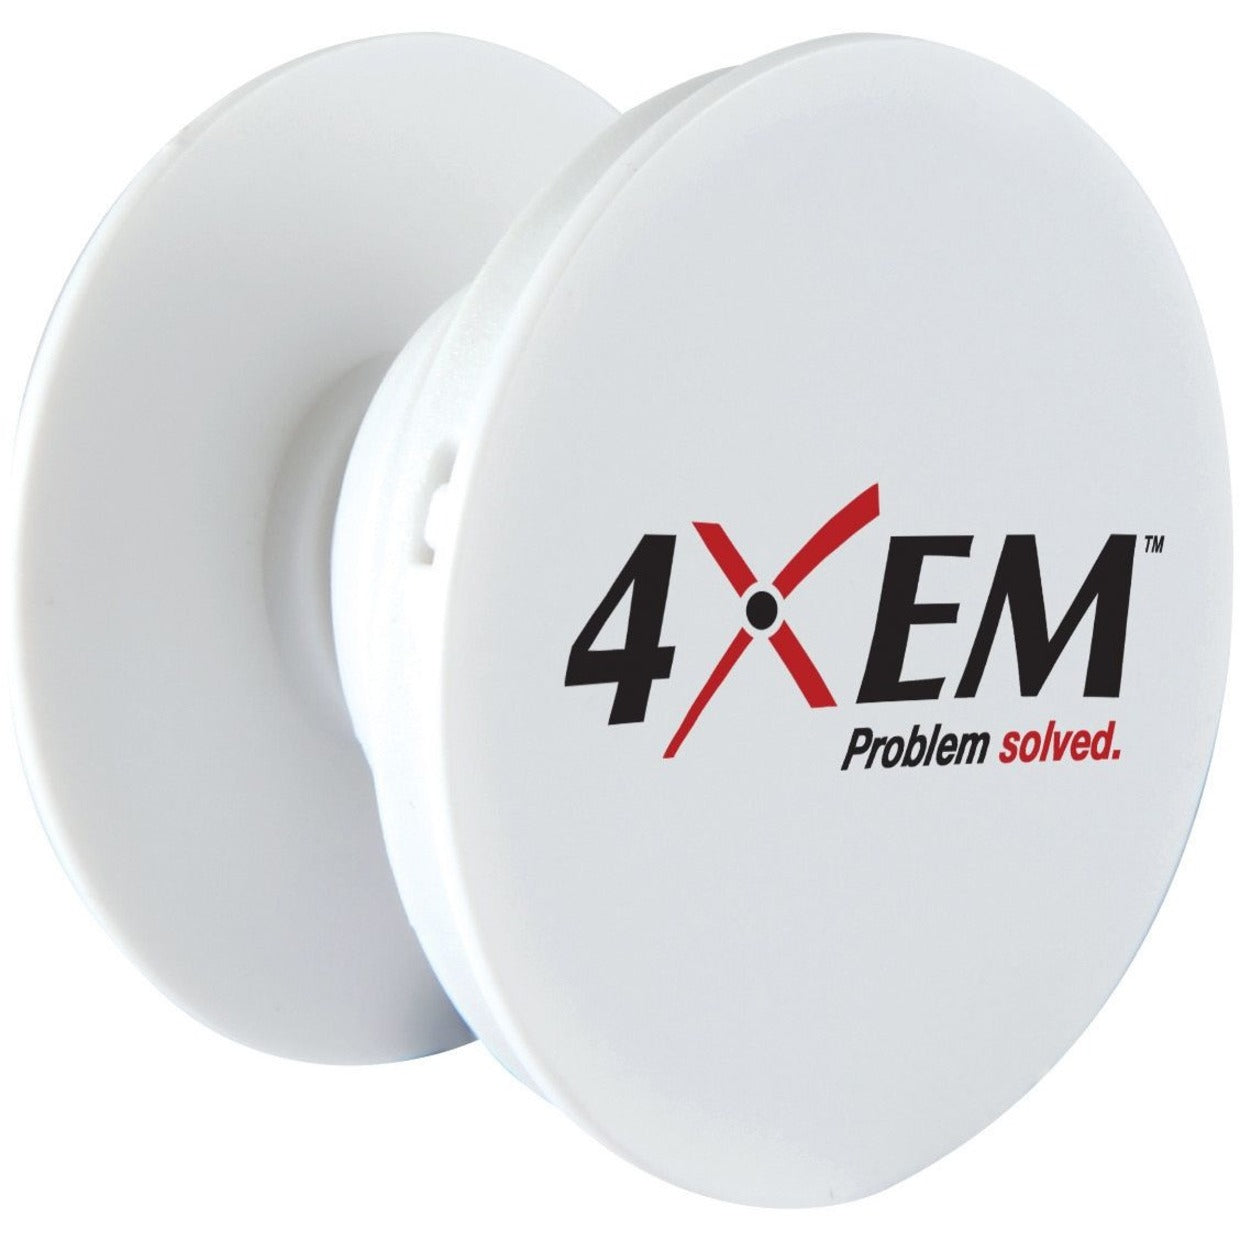 4XEM 4XPOPSOCKET Pop-able Expanding Phone Socket, Simple Installation, Adhesive, Adjustable, Reusable, White